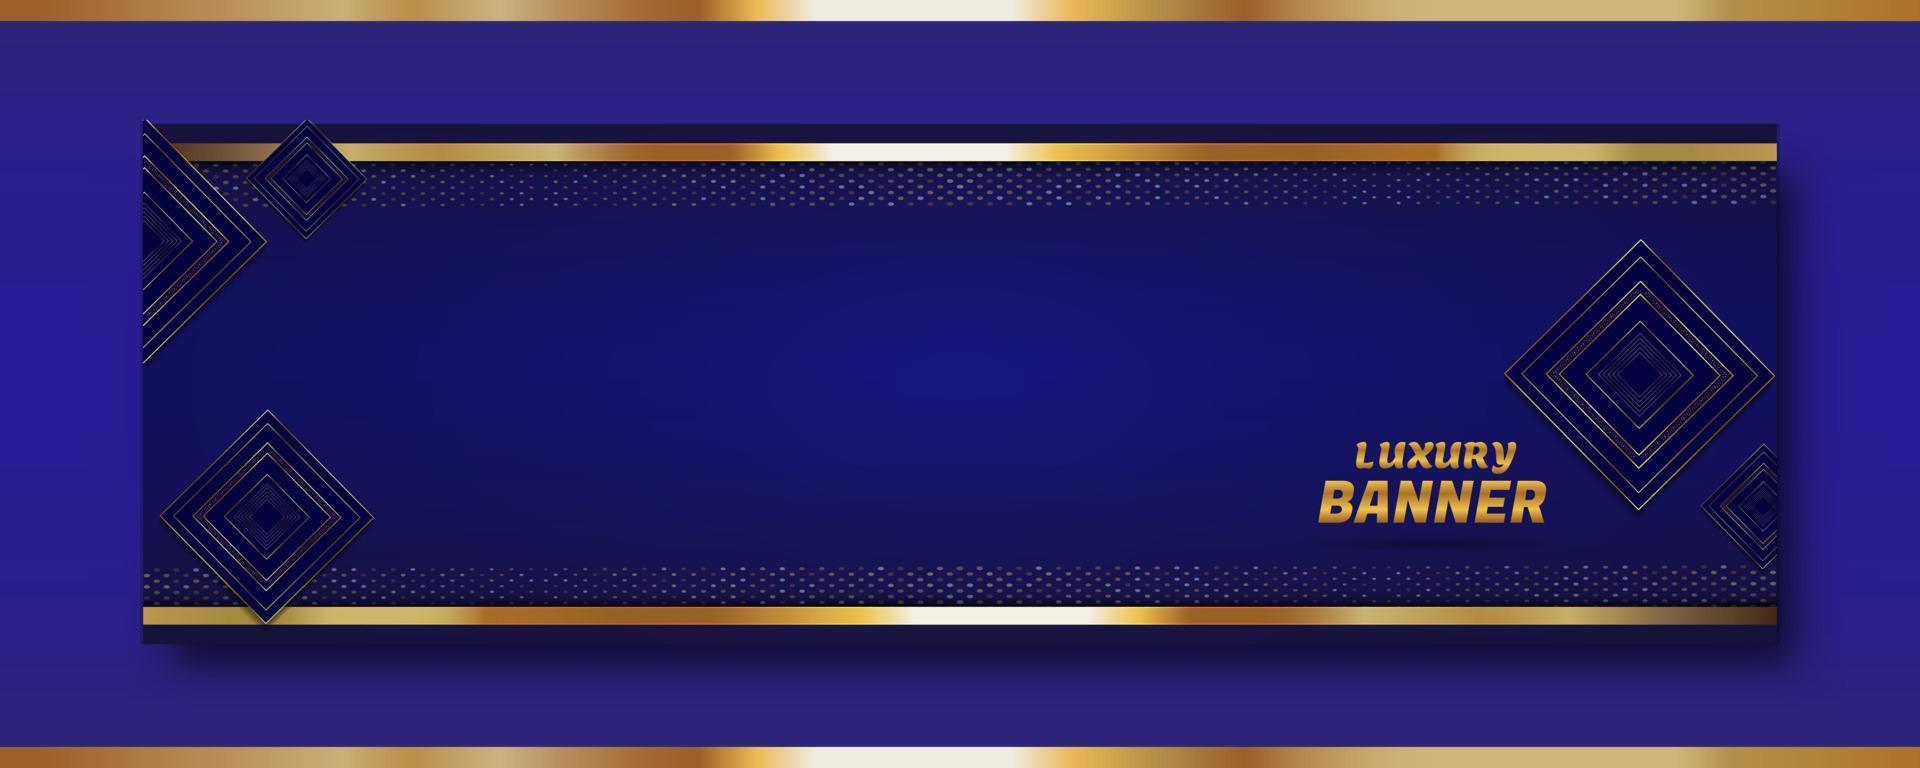 blue background. rectangular luxury banner. shiny gold texture and frame. vector